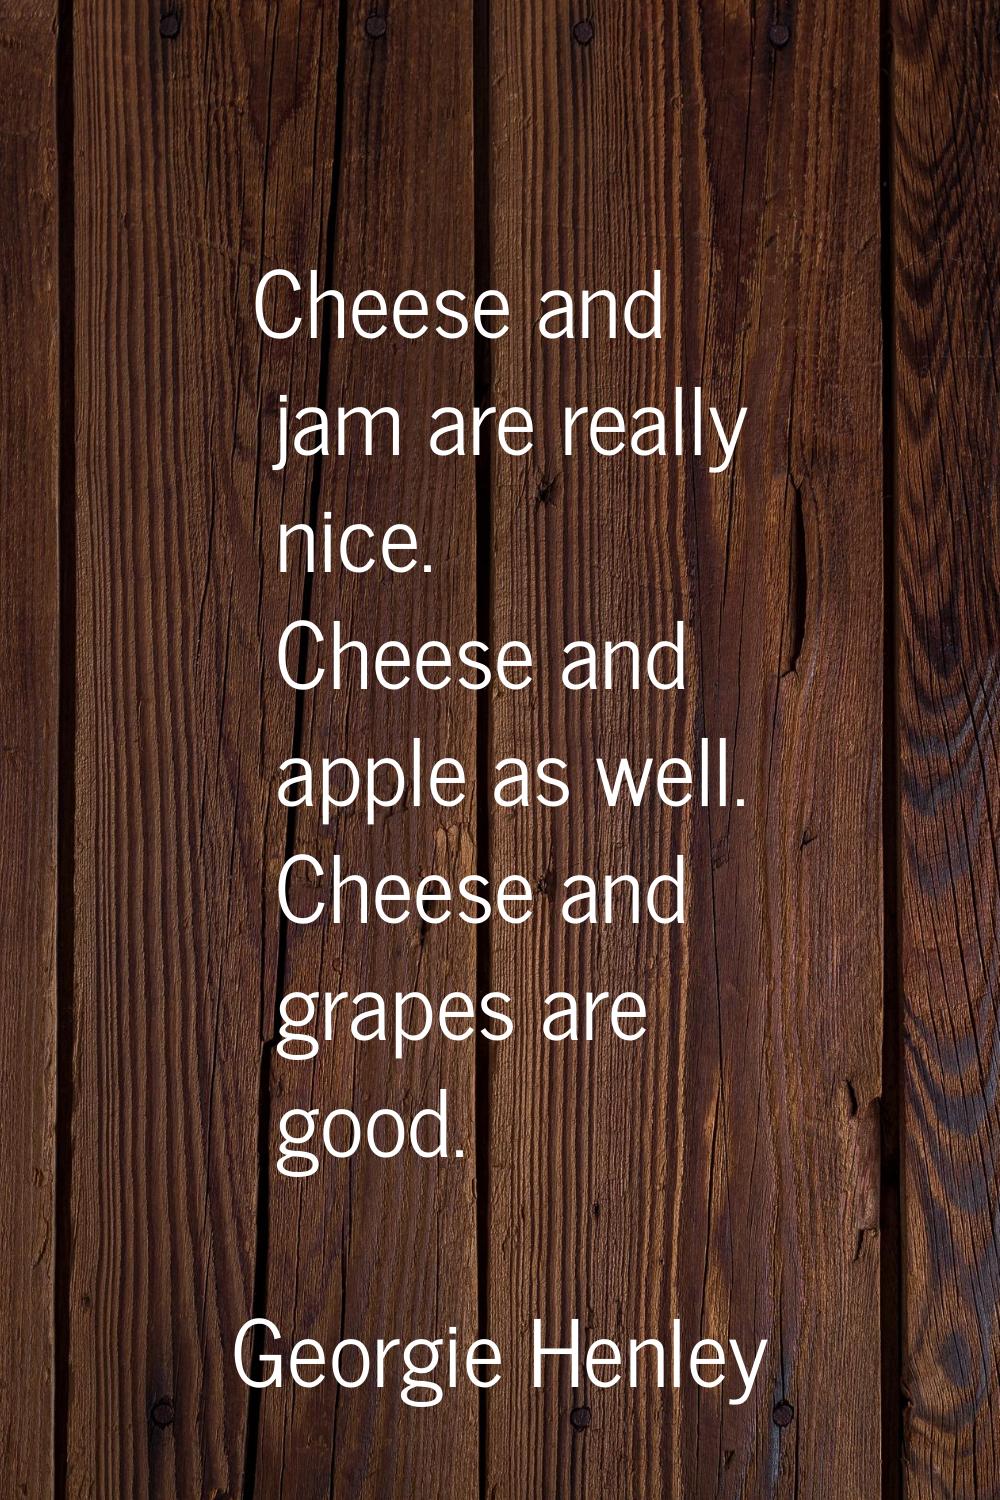 Cheese and jam are really nice. Cheese and apple as well. Cheese and grapes are good.